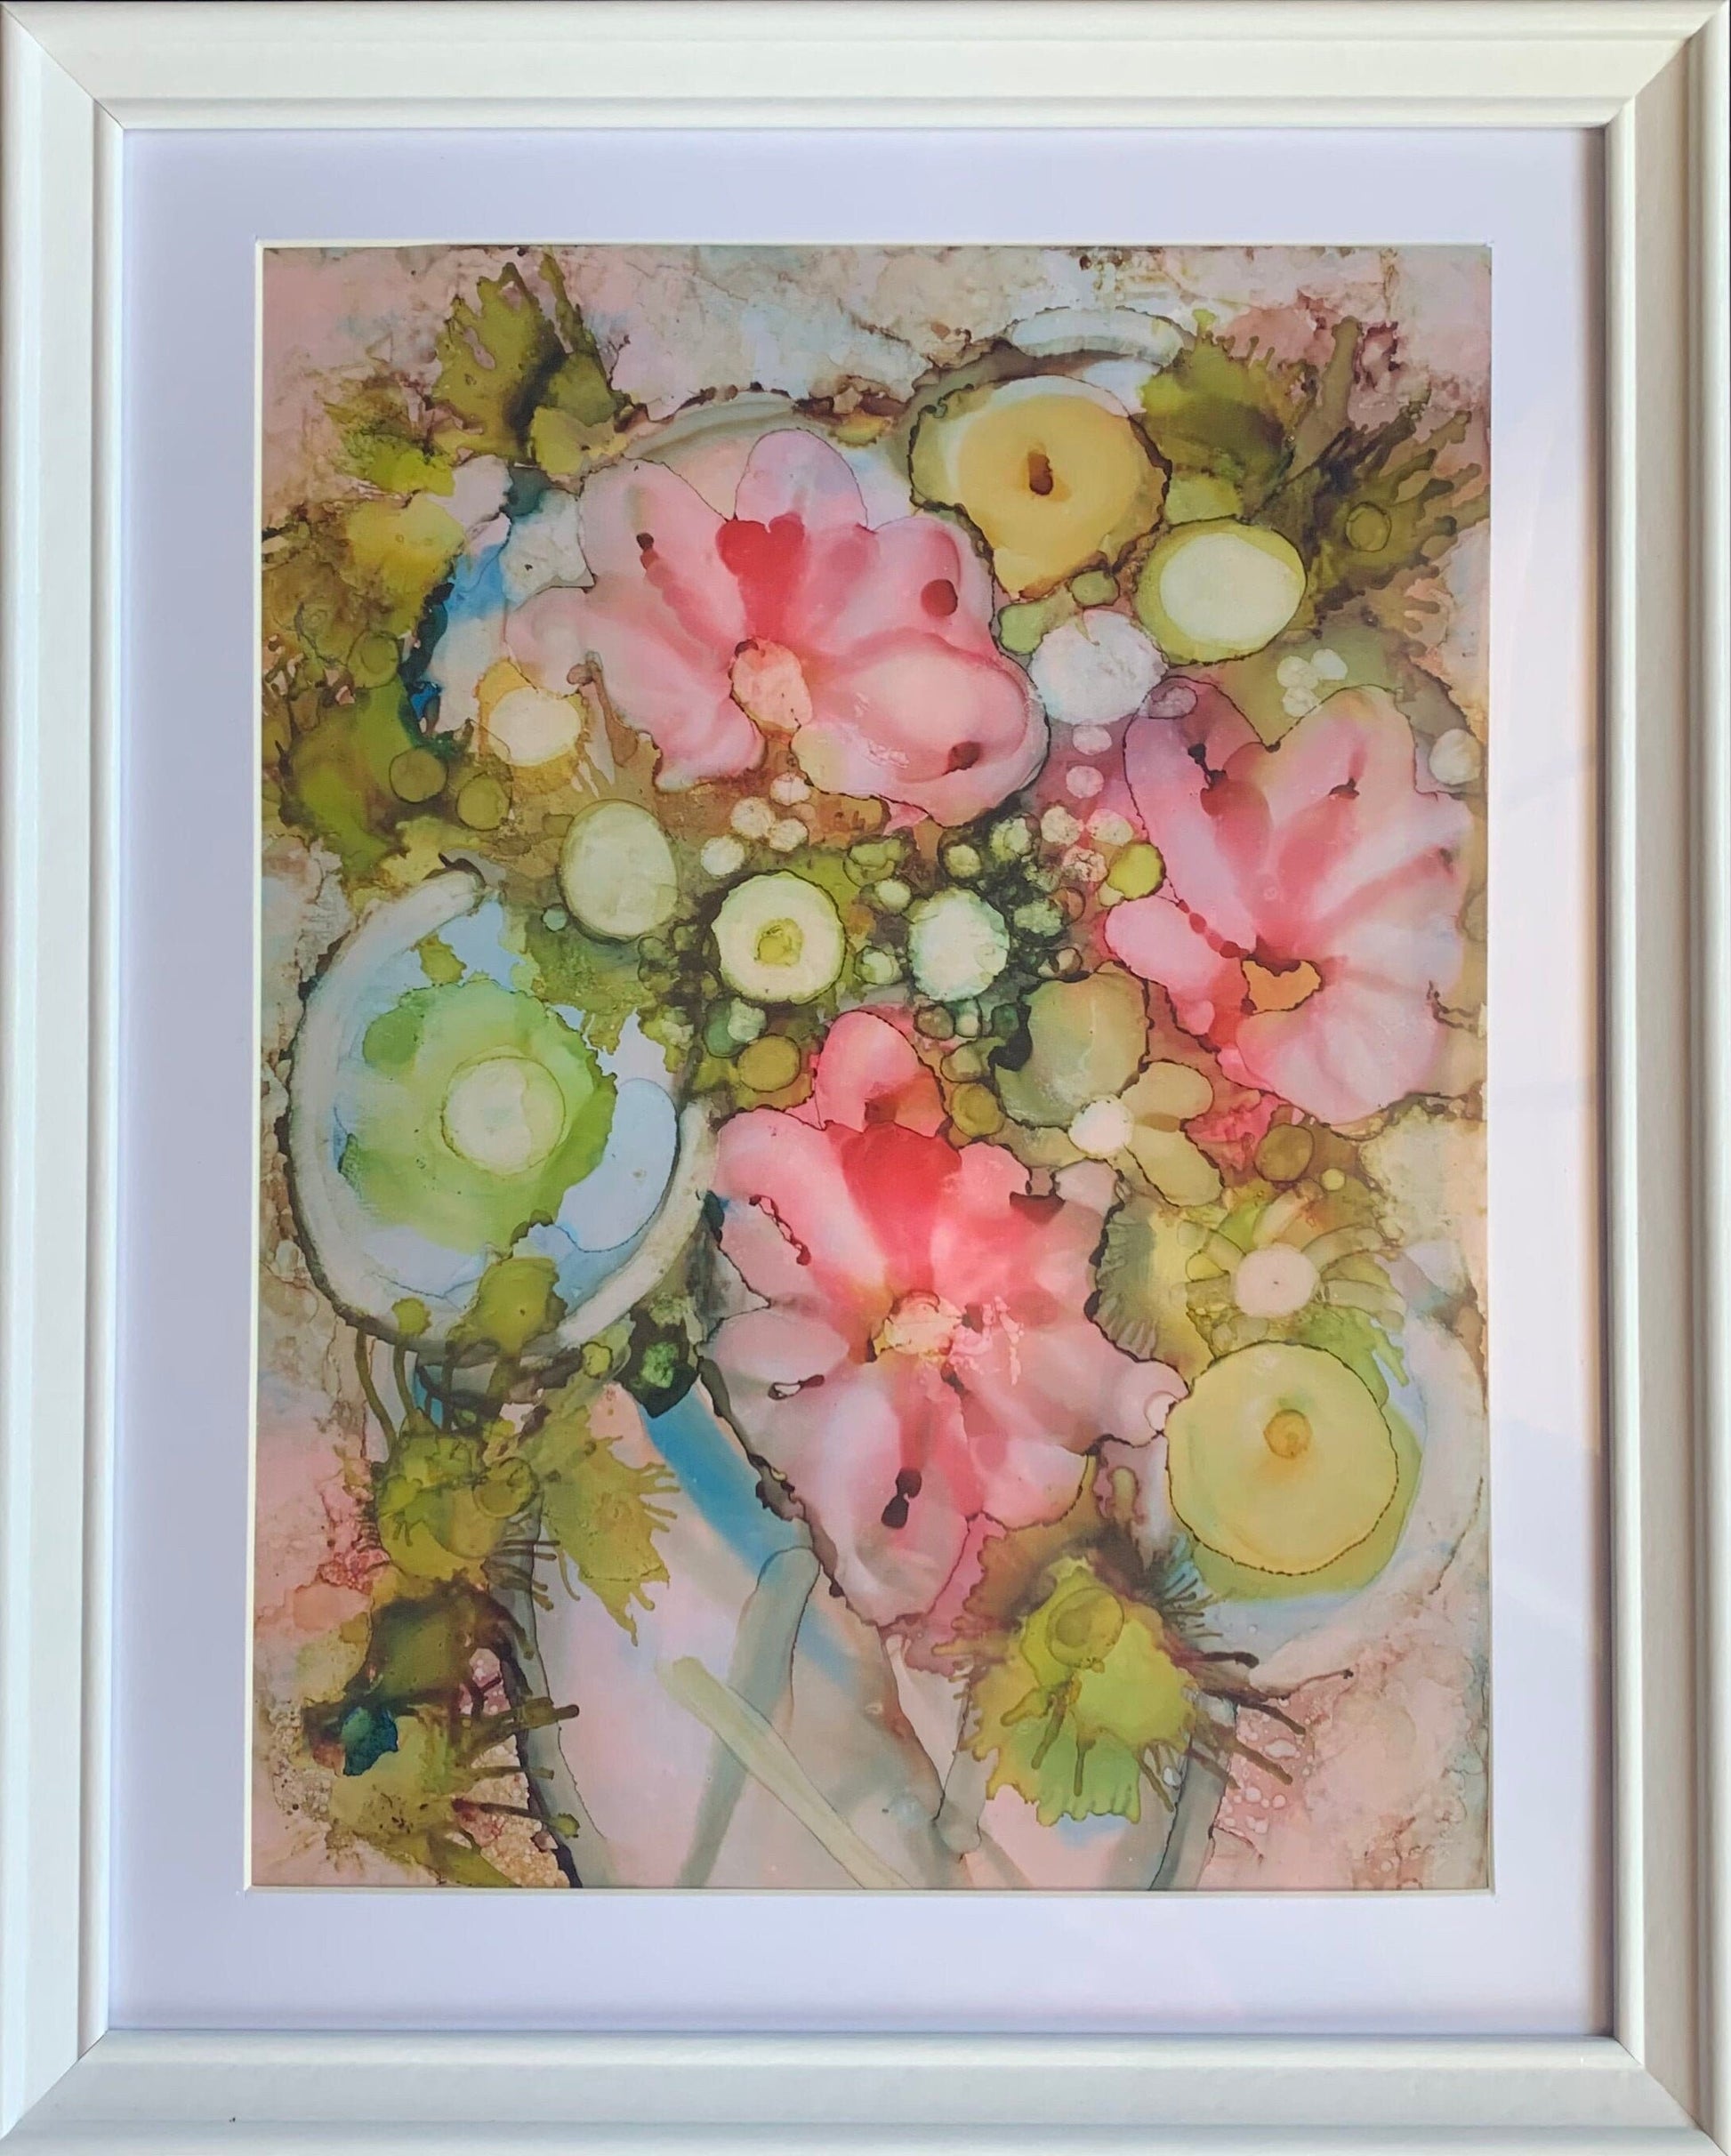 Floral Ink Abstract Pastel Painting #1 Rainbow colors Whimsical art One of a kind nature wall art Garden decor feminine flower lover gift